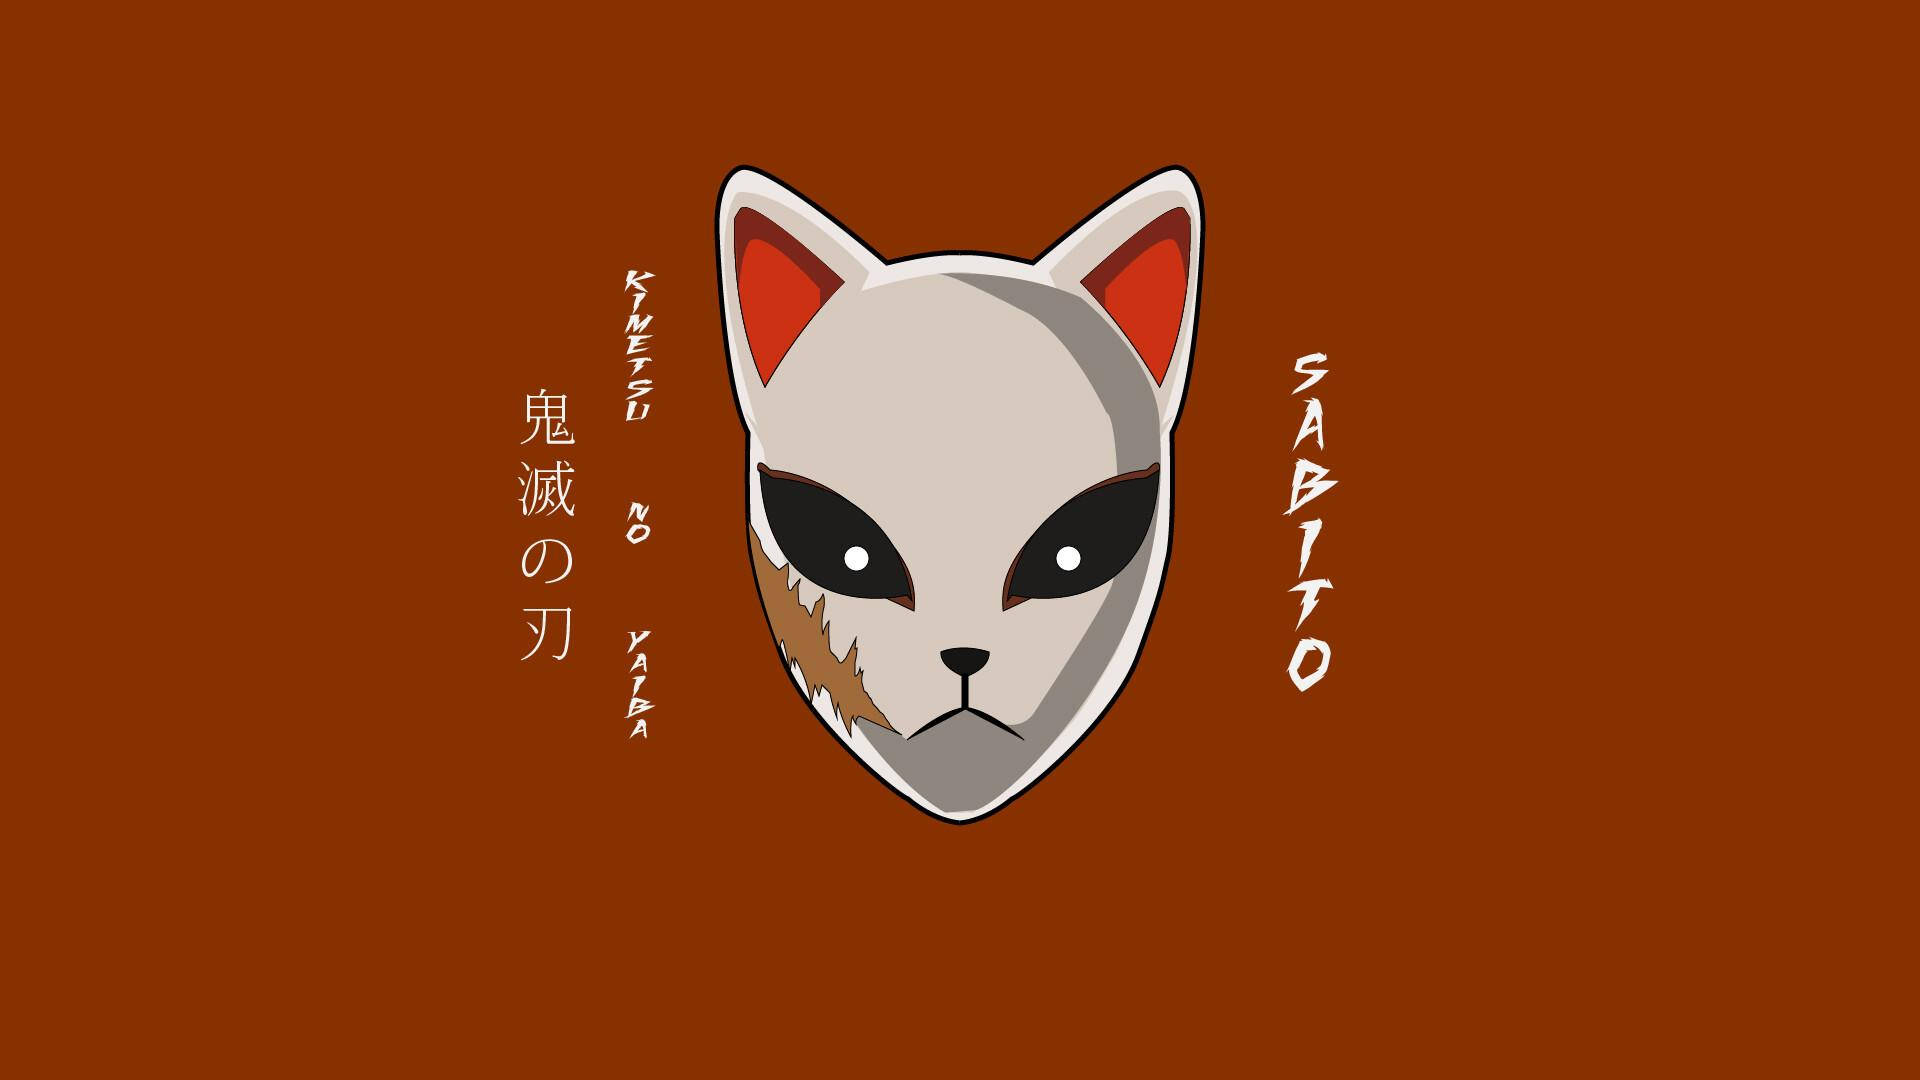 Demon Slayer Mask With Japanese Letters Background